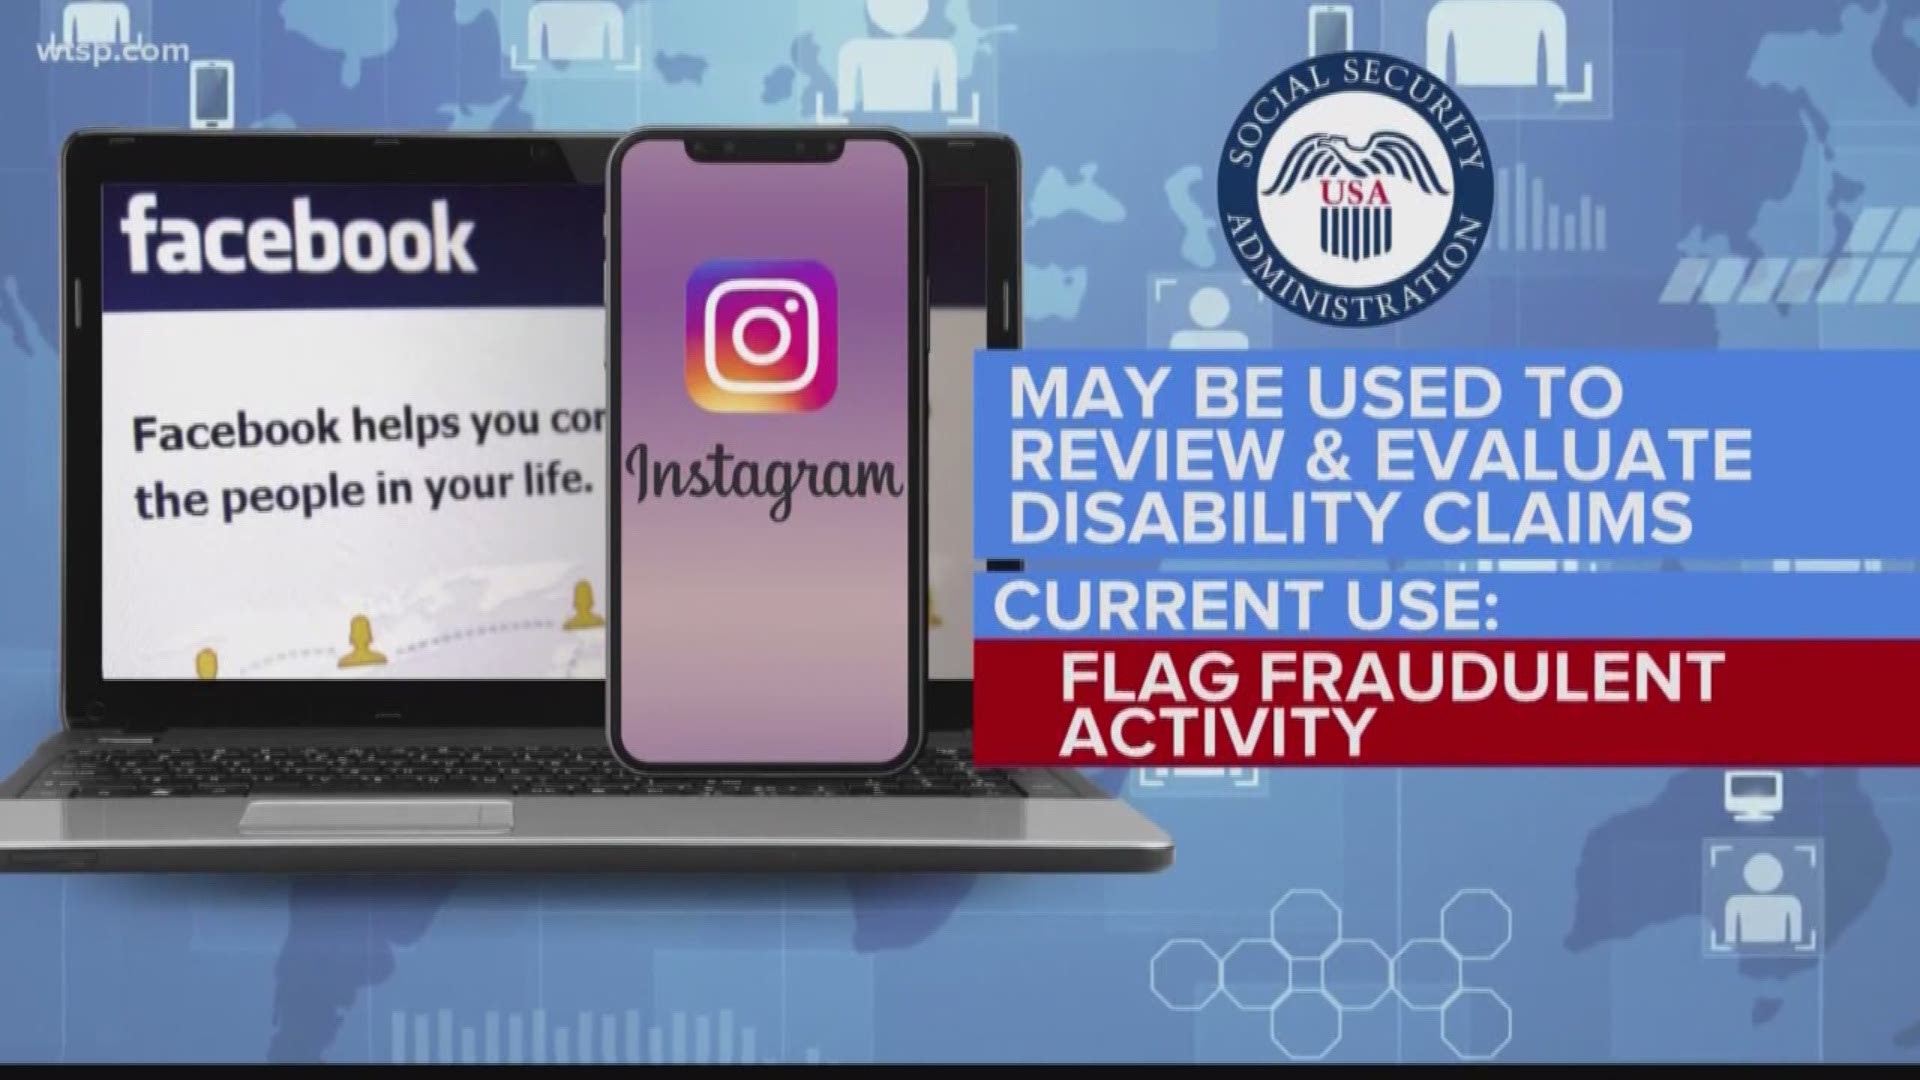 Federal officials are looking into how to use social media posts to monitor for fraud.